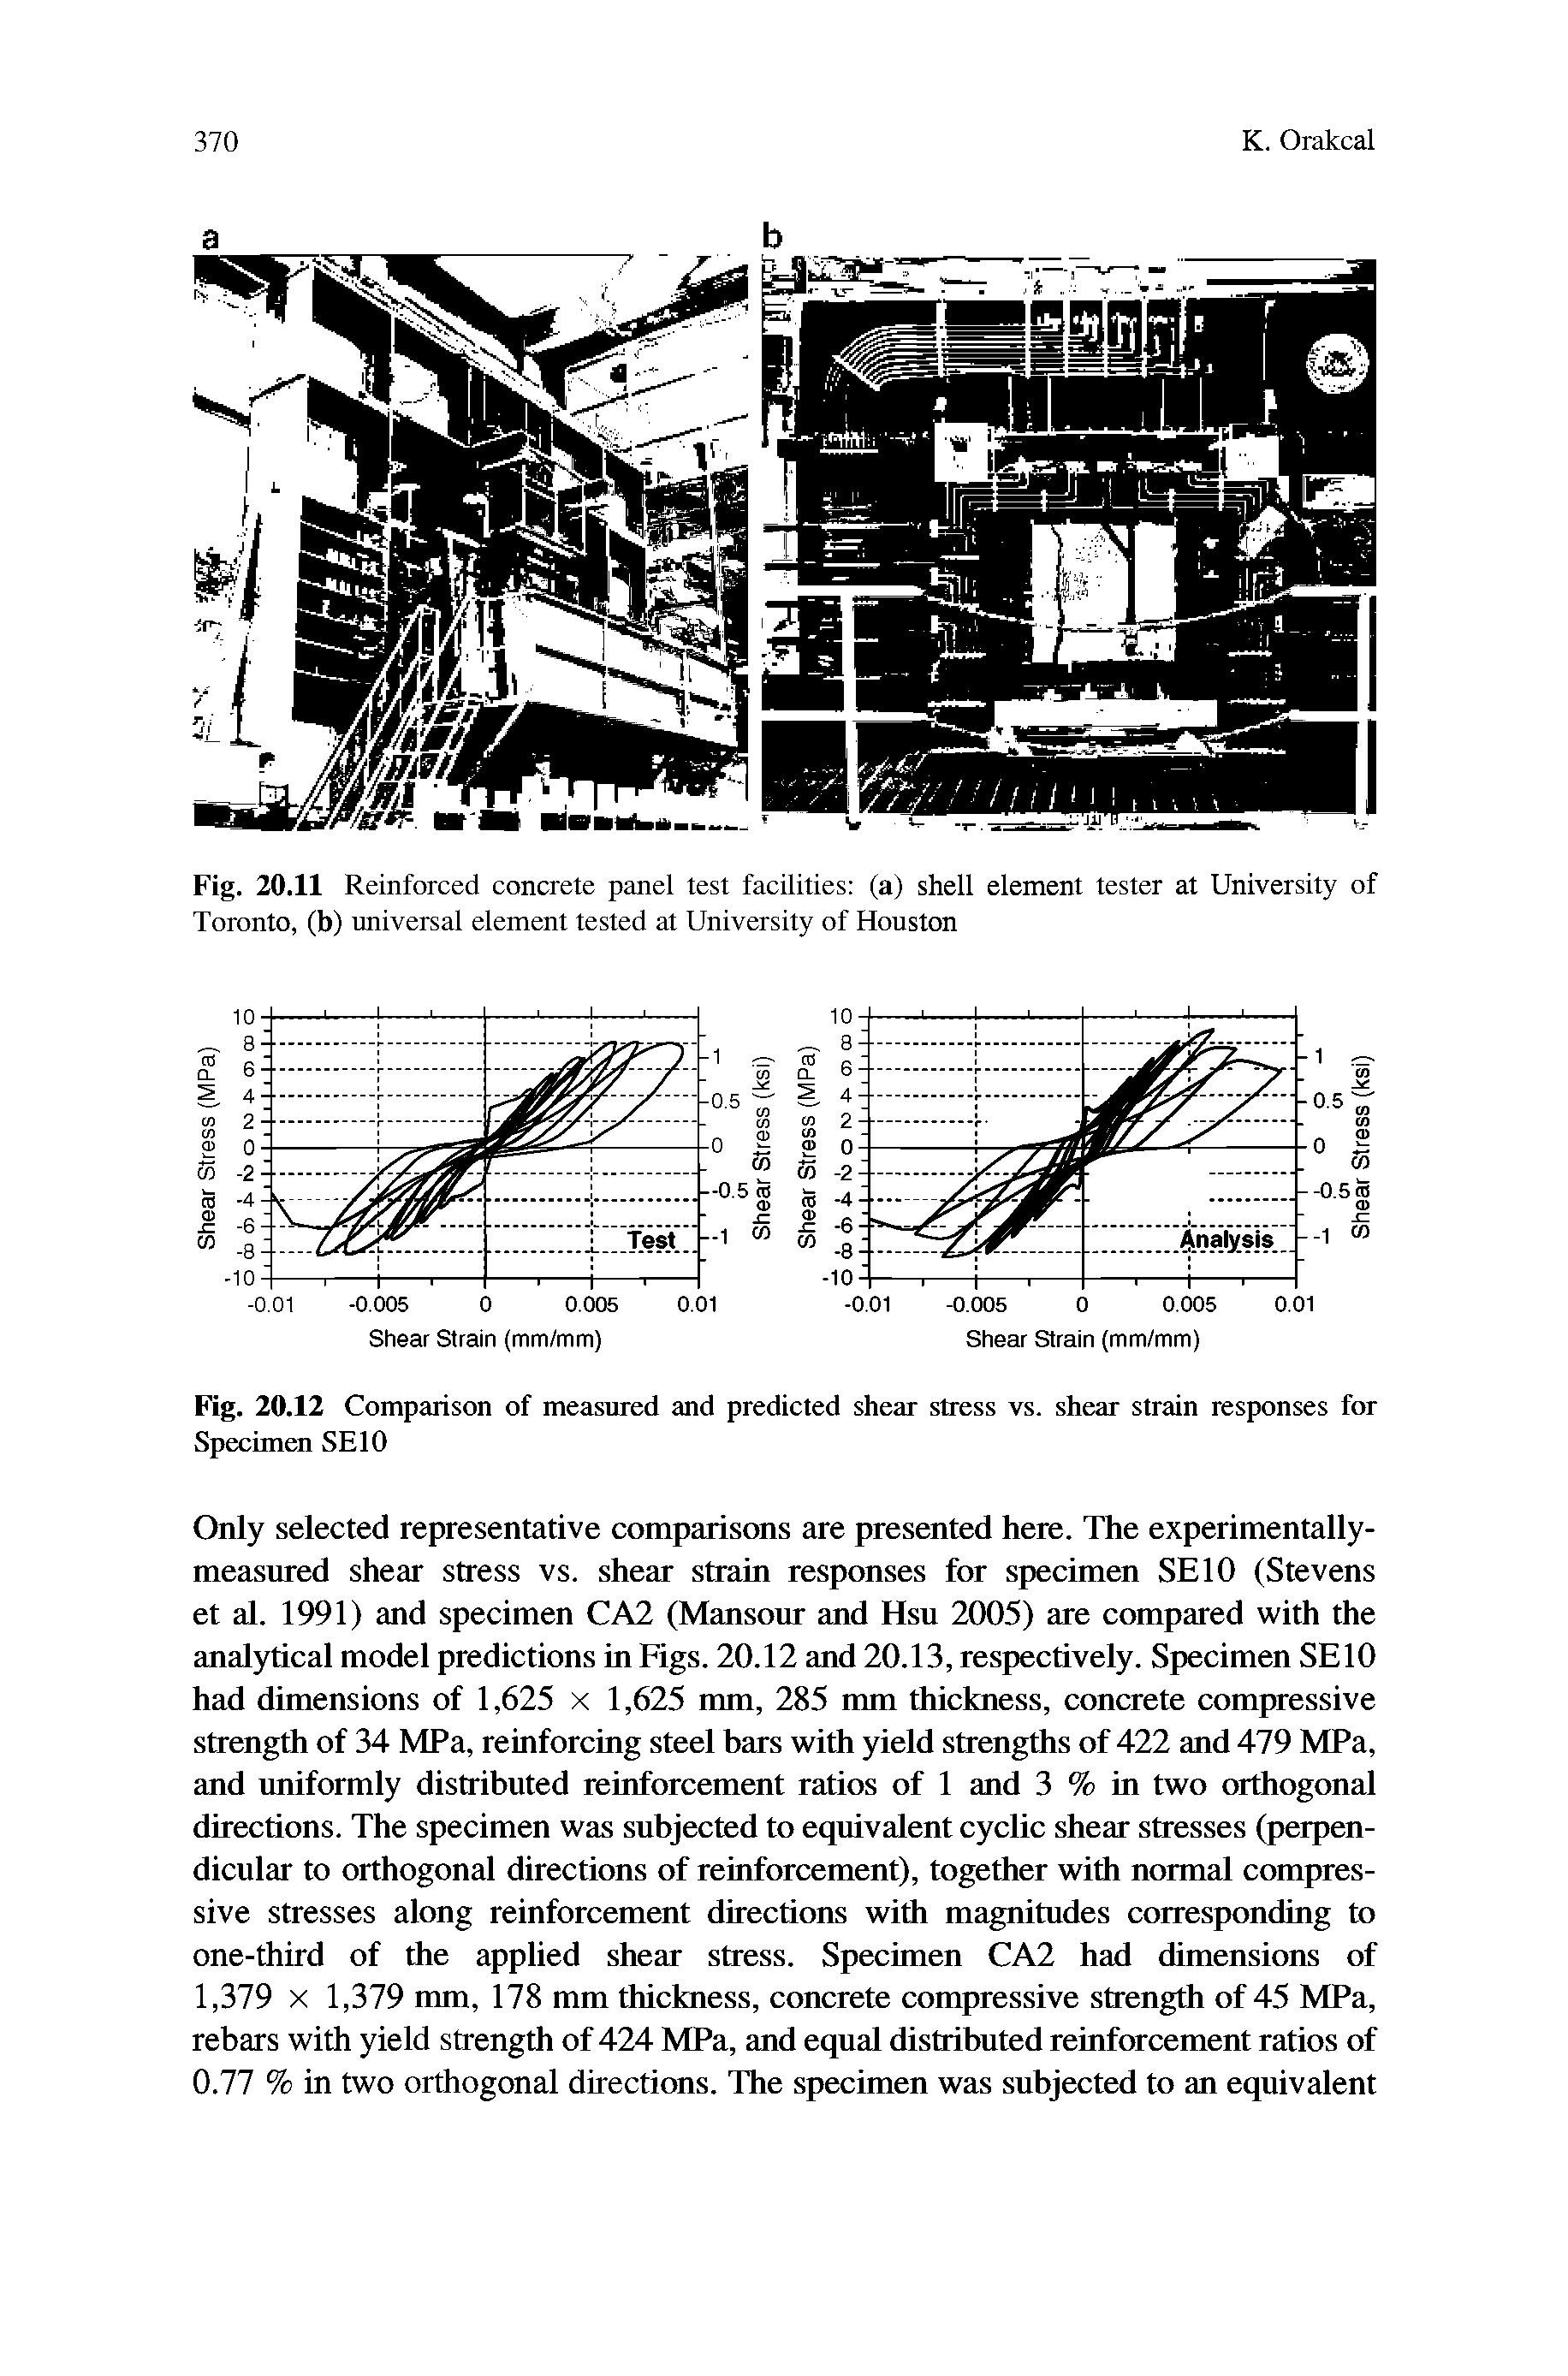 Fig. 20.11 Reinforced concrete panel test facilities (a) shell element tester at University of Toronto, (b) universal element tested at University of Houston...